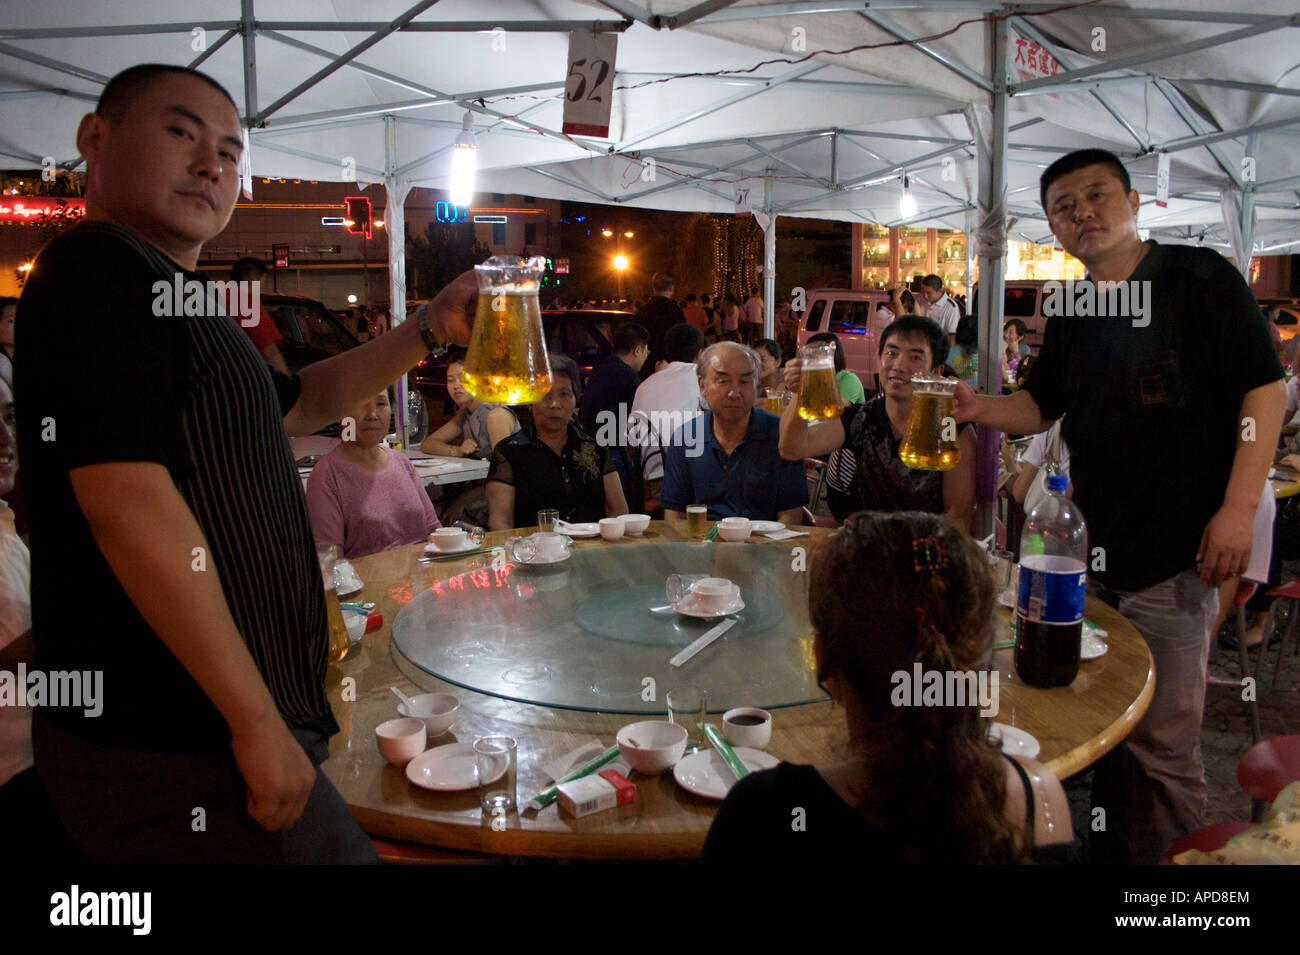 A family poses with their pitchers of beer at a restaurant near the Tsingtao brewery Qingdao Shandong China Stock Photo